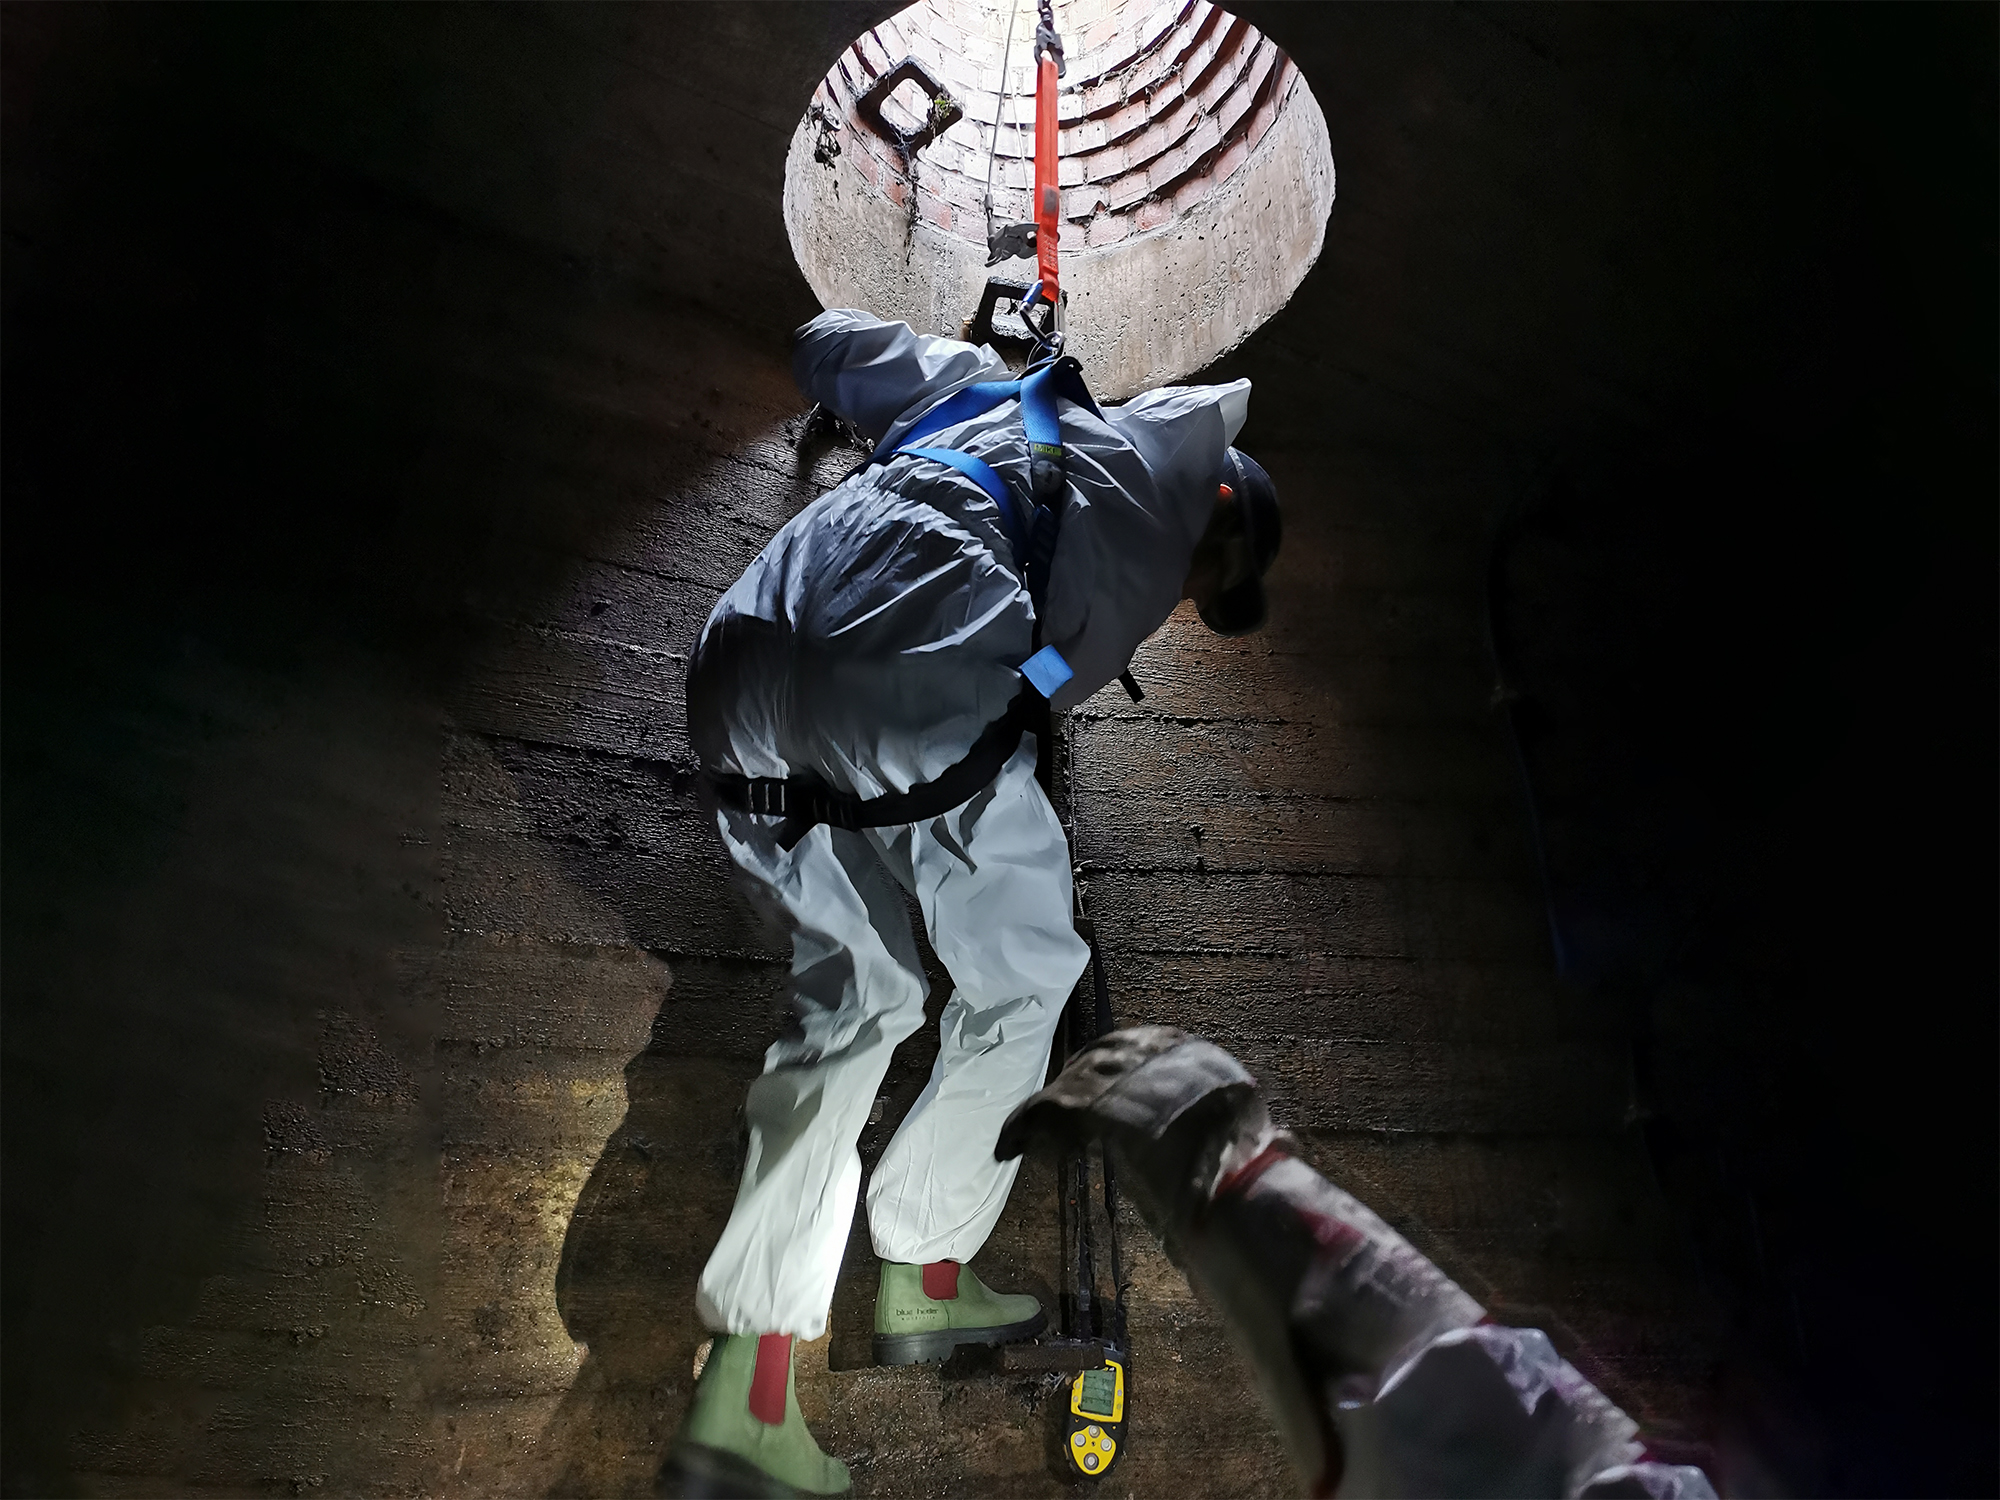 picture taken in the storm sewer, scientist descending down the stairs